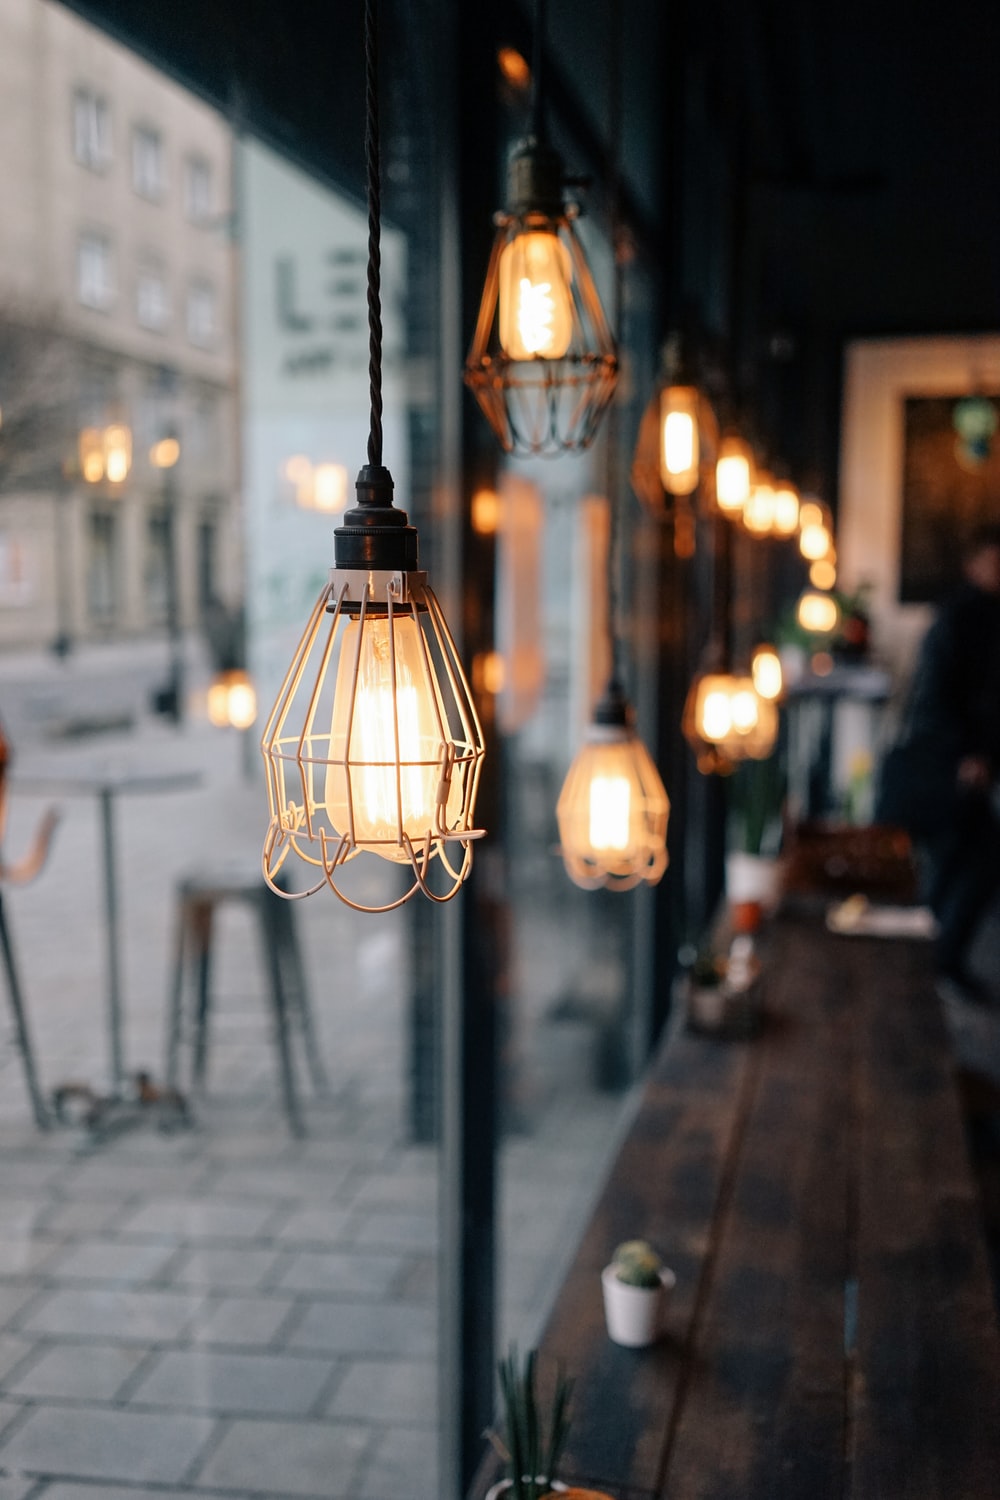 Cafe Lights Picture. Download Free Image